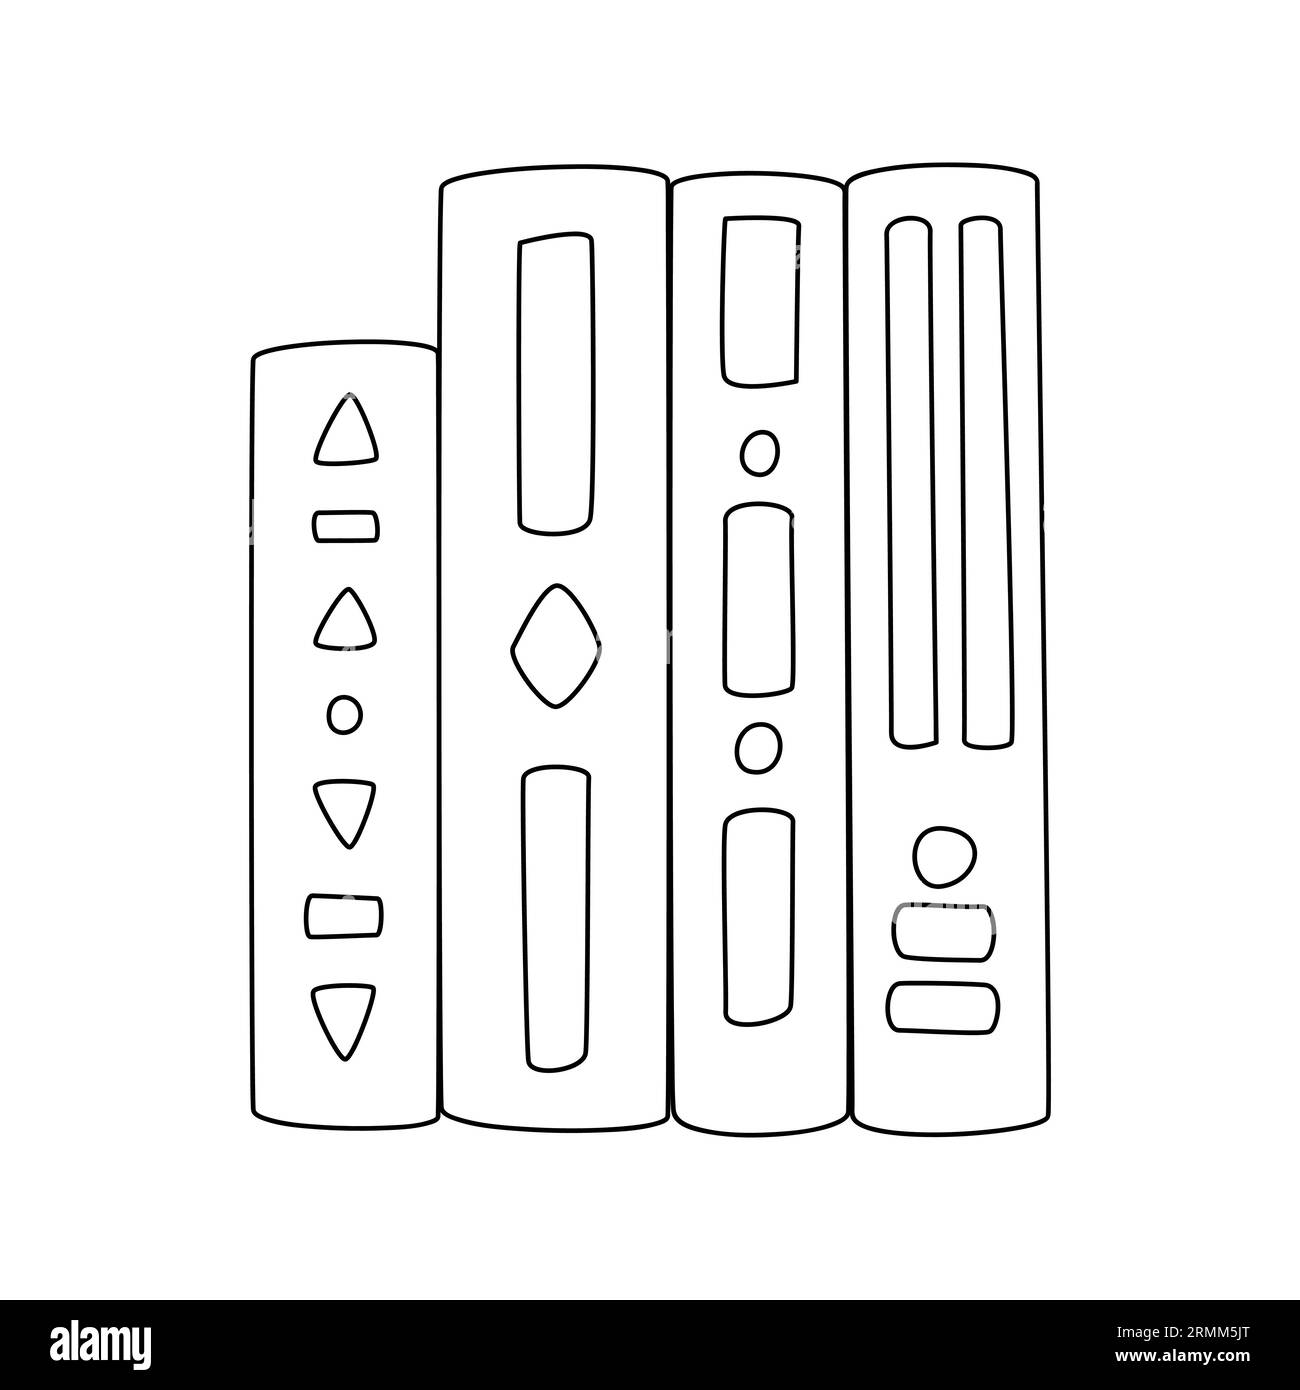 Hardcover books stand in a row. Hand drawn Outline books, textbooks, literature. Symbol of learning, education, and science. Black and white doodle ve Stock Vector